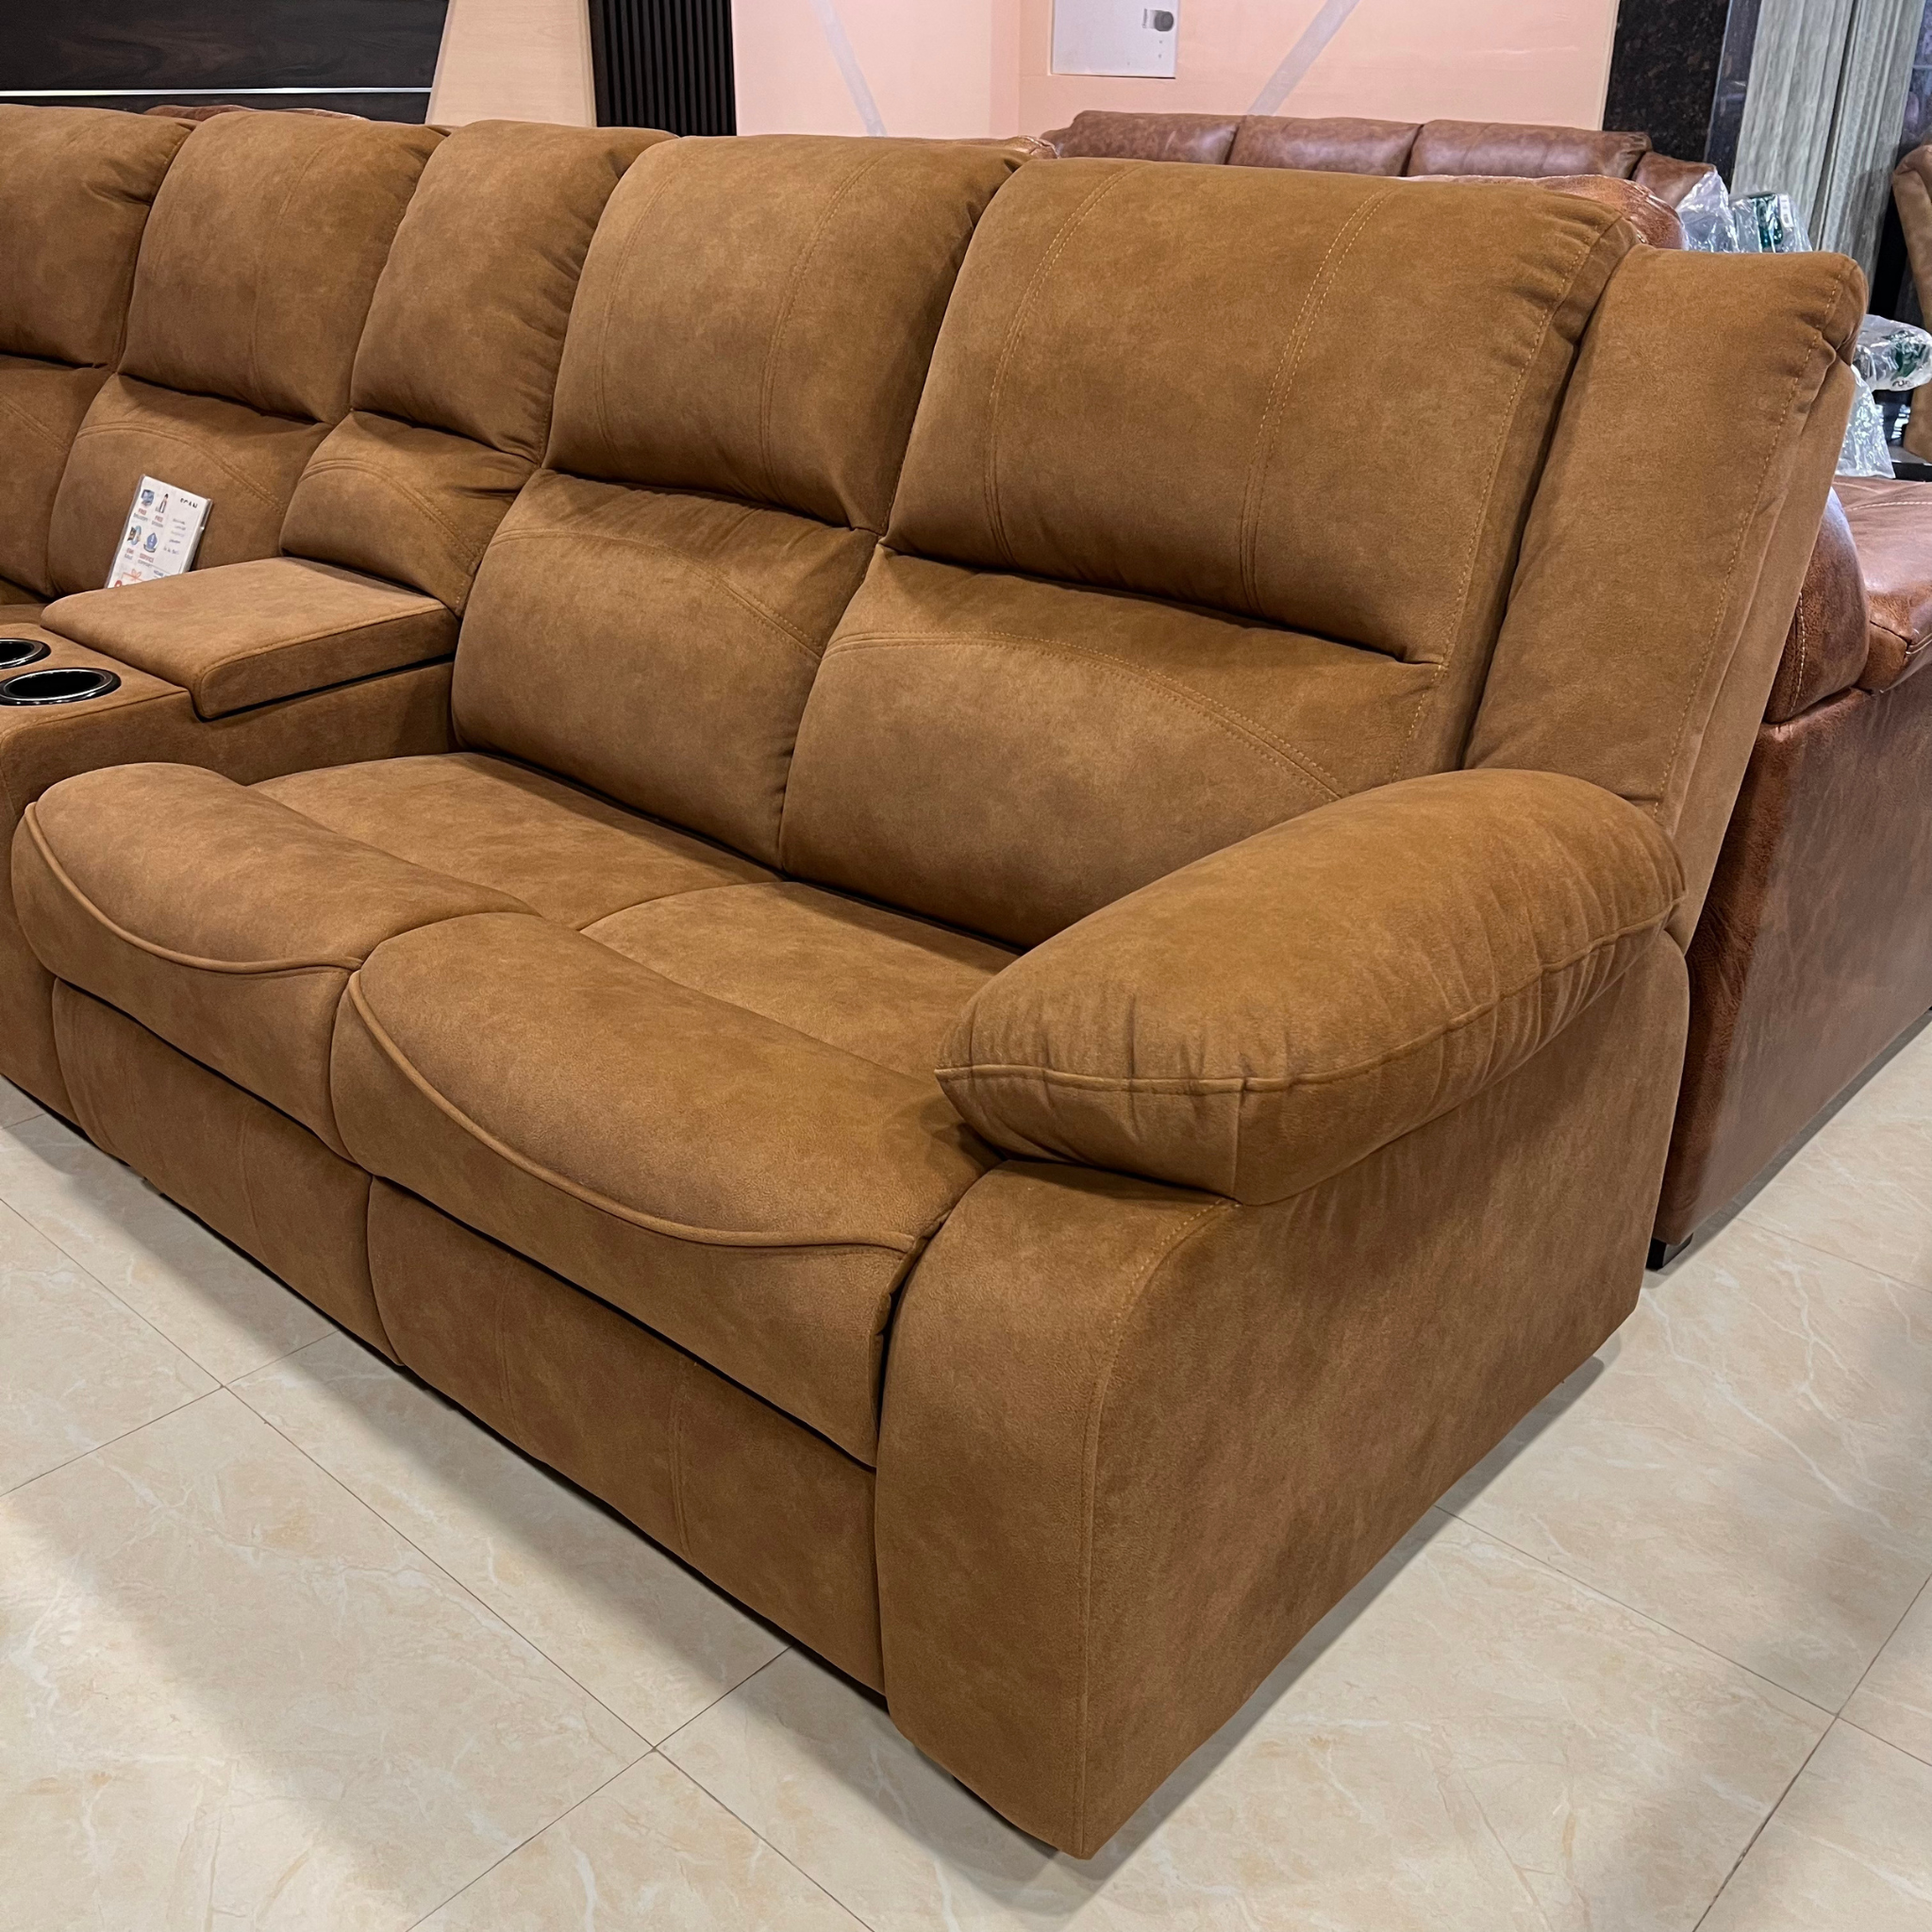 Recliner Sofa Set with Cup Holder